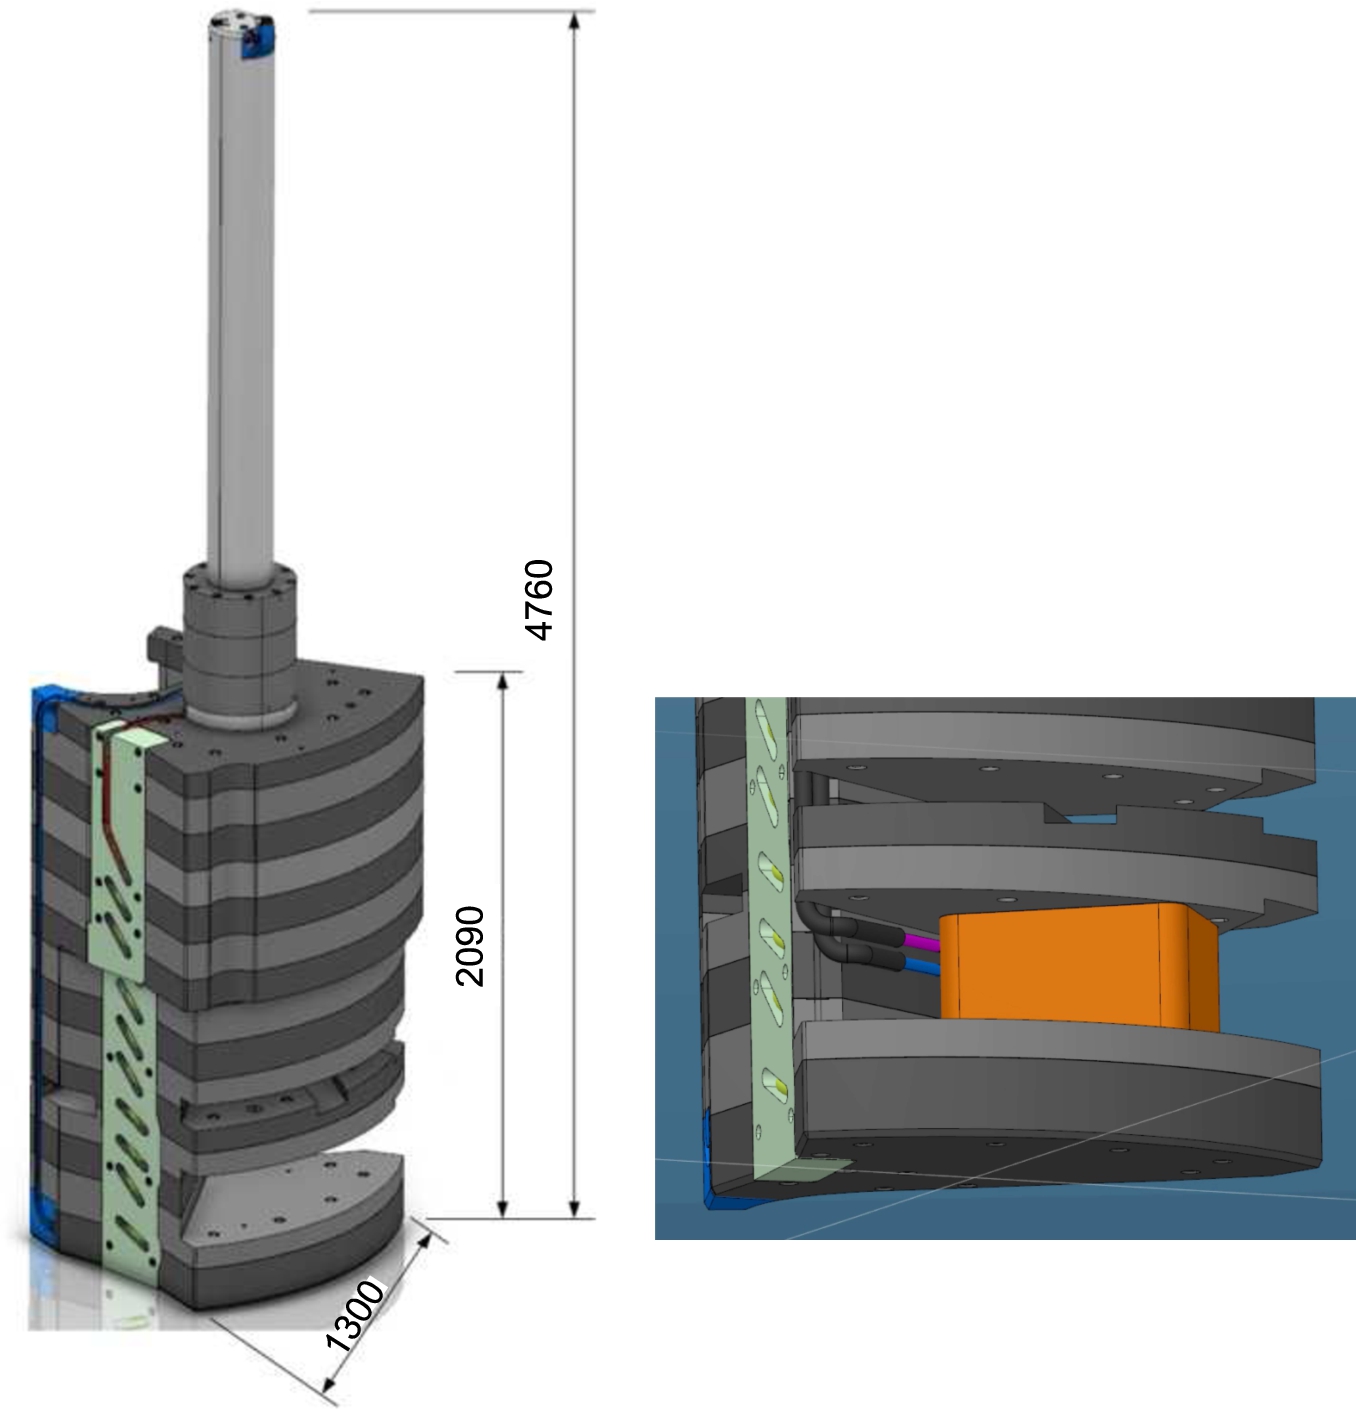 Location option #2 for a UCN/VCN source. Left: moderator shielding block. Right: possible UCN/VCN source holder (orange) integrated in the lower part of the moderator shielding block. Dimensions in mm.